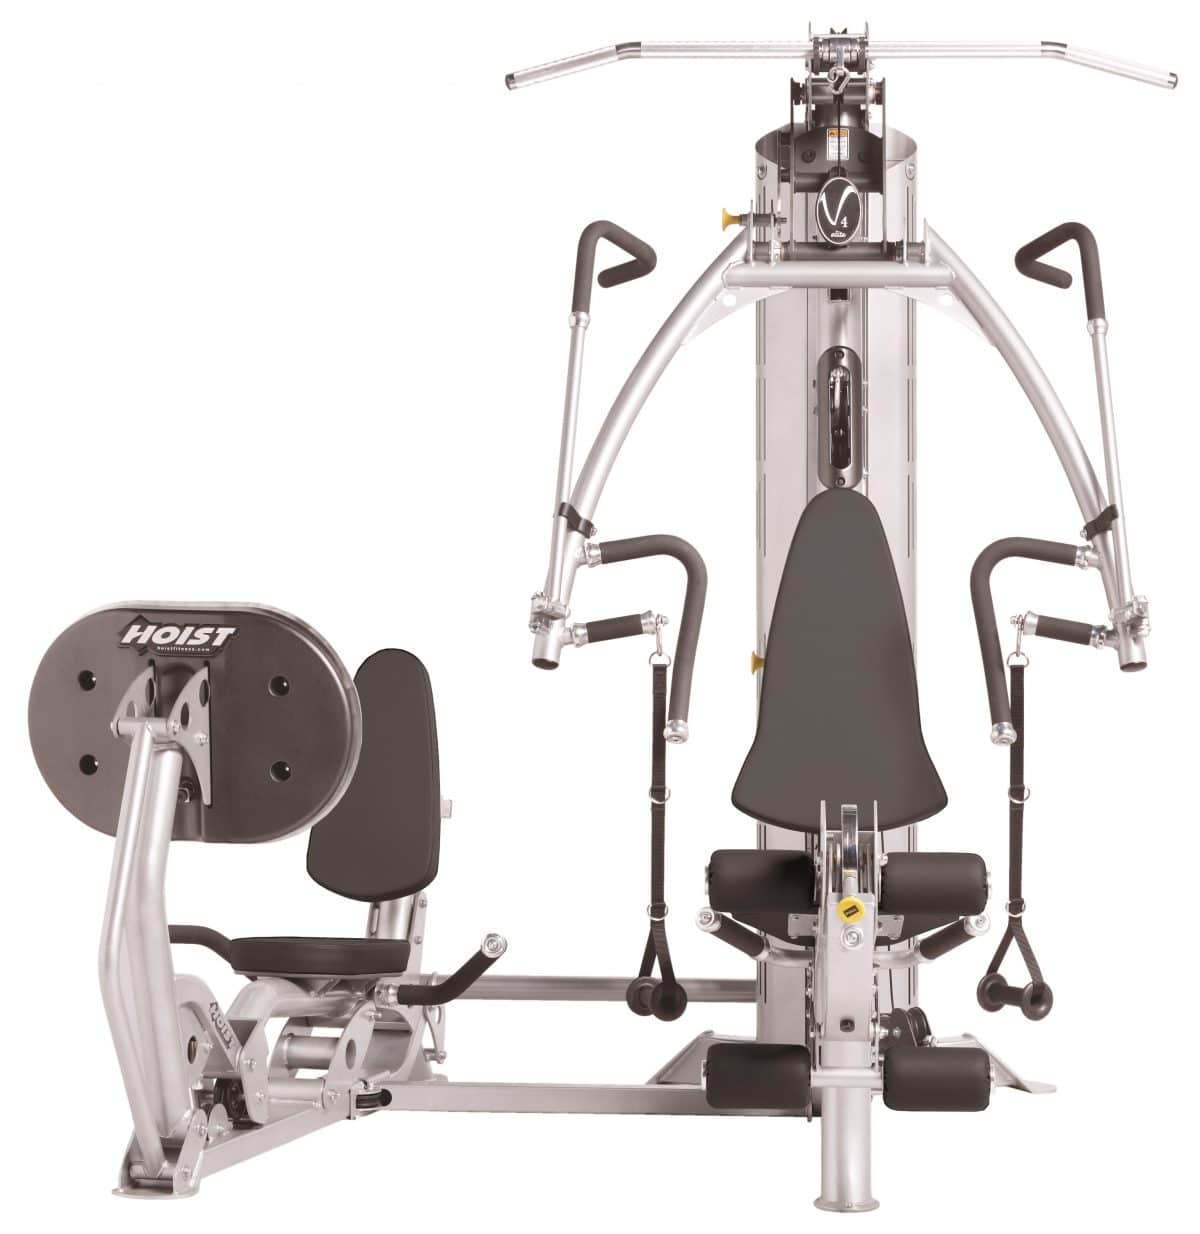 A gym equipment set with a bench and a pulley.